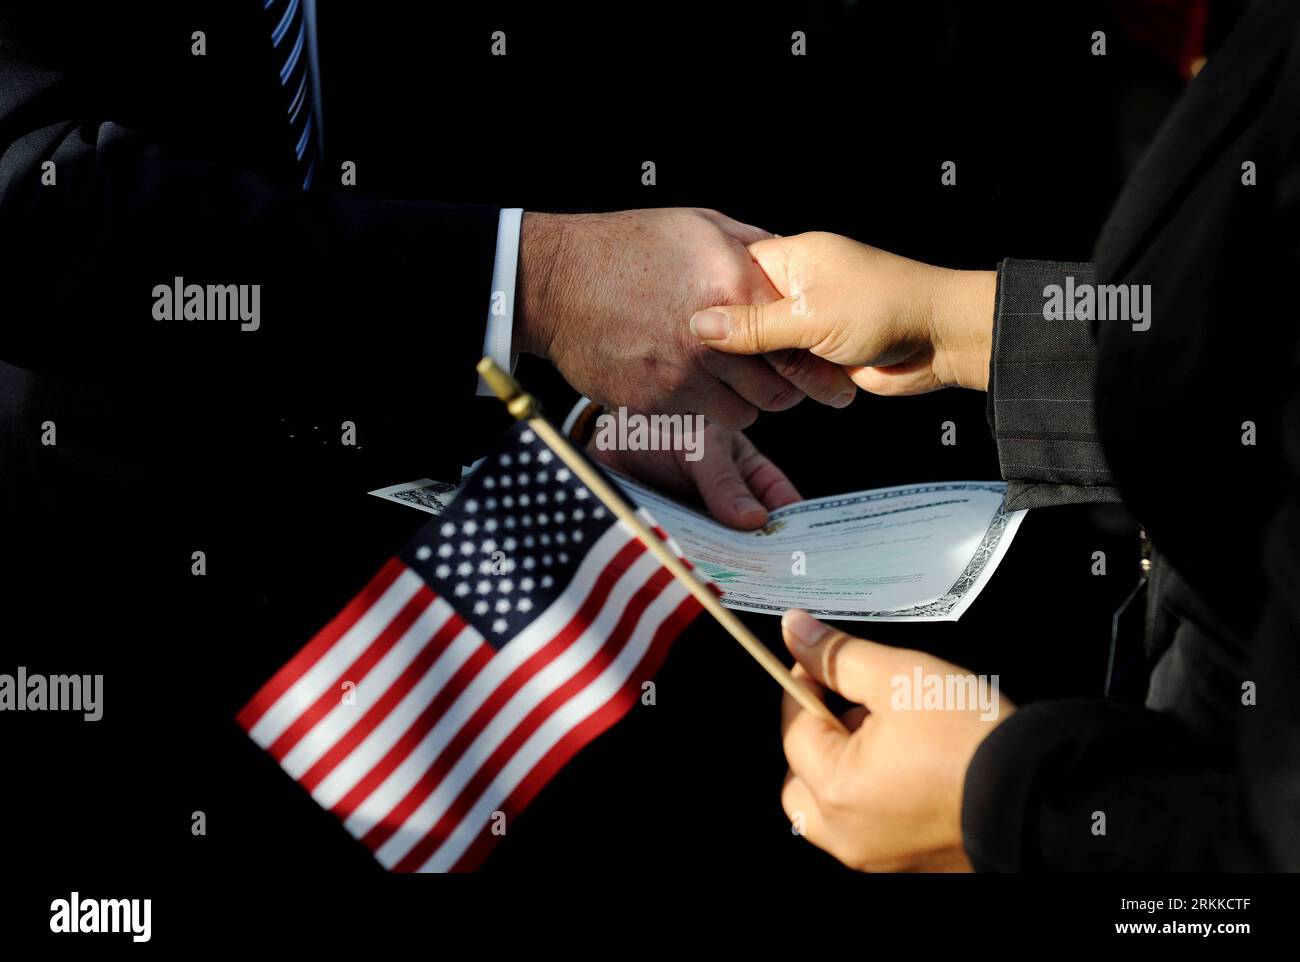 Bildnummer: 56227290  Datum: 28.10.2011  Copyright: imago/Xinhua (111028) -- NEW YORK, Oct. 28, 2011 (Xinhua) -- A new citizen (R) receives Certificate of Naturalization from Alejandro Mayorkas, director of U.S. Citizenship and Immigration Services, during a naturalization ceremony at Liberty Island in New York, the United States, on Oct. 28, 2011. One hundred and twenty-five citizens were naturalized on the occasion of the 125th anniversary of the Statue of Liberty at Liberty Island. (Xinhua/Shen Hong) U.S.-NEW YORK-STATUE OF LIBERTY-ANNIVERSARY-NATURALIZATION PUBLICATIONxNOTxINxCHN Gesellsch Stock Photo